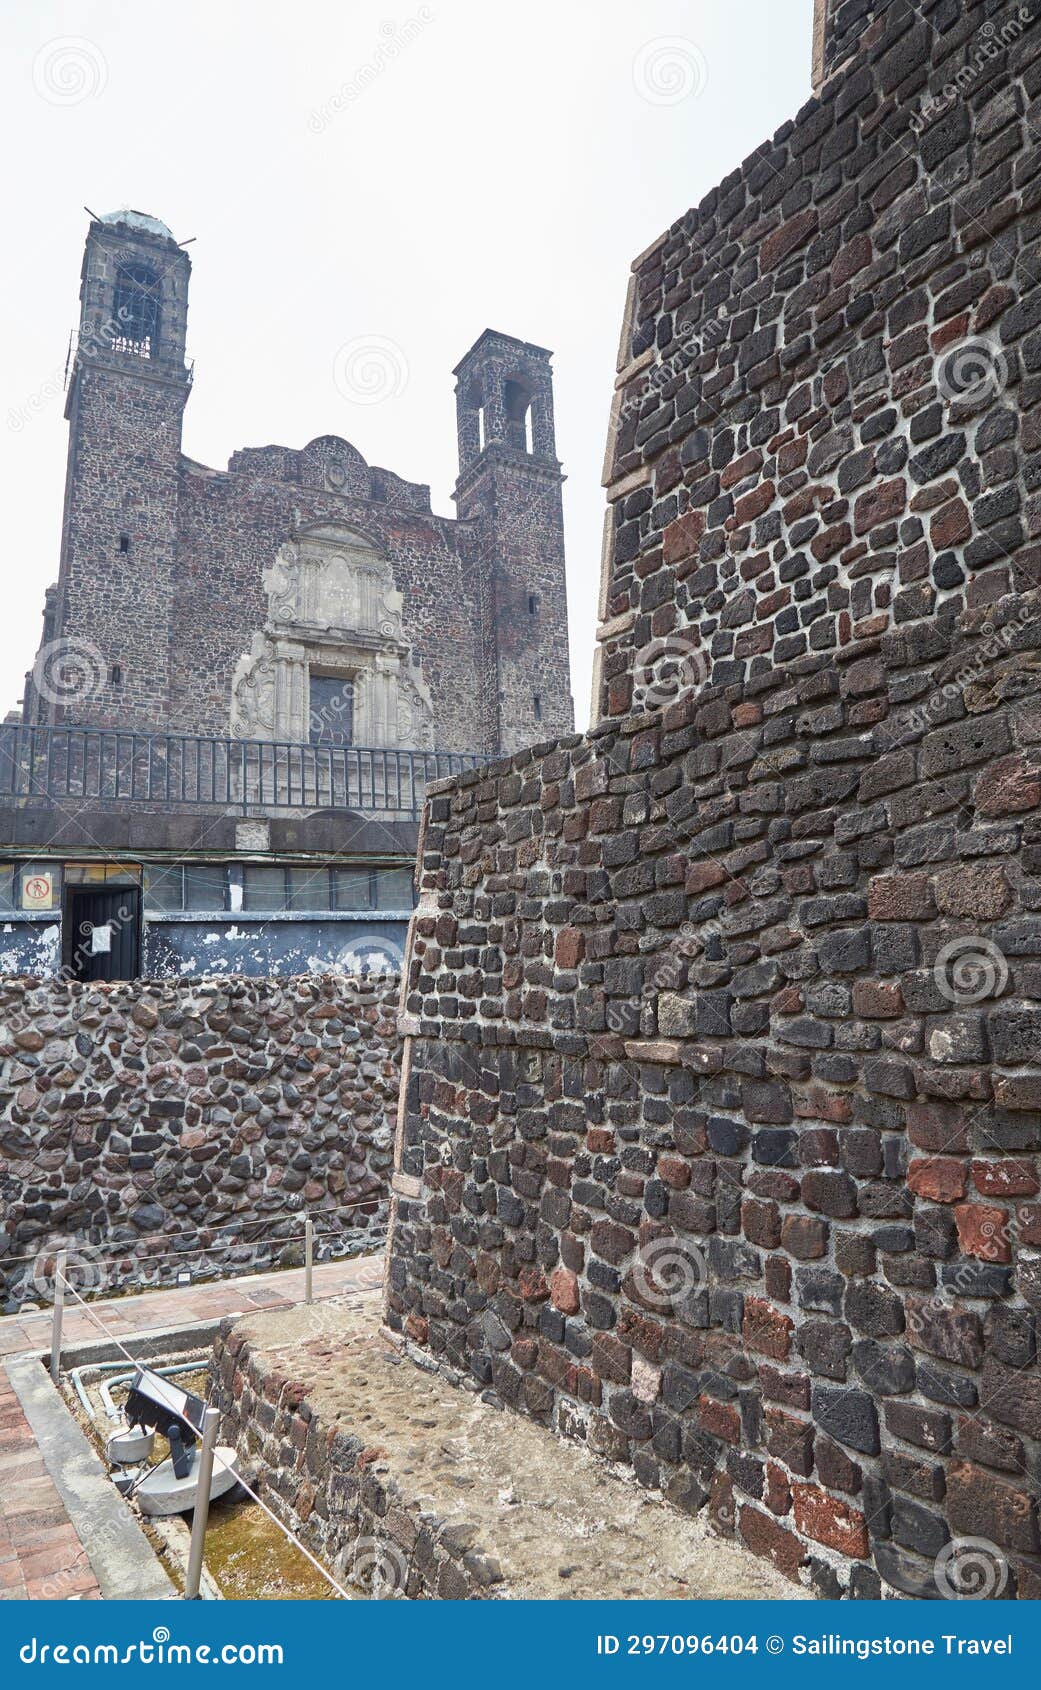 the ancient aztec ruins of tlatelolco in mexico city